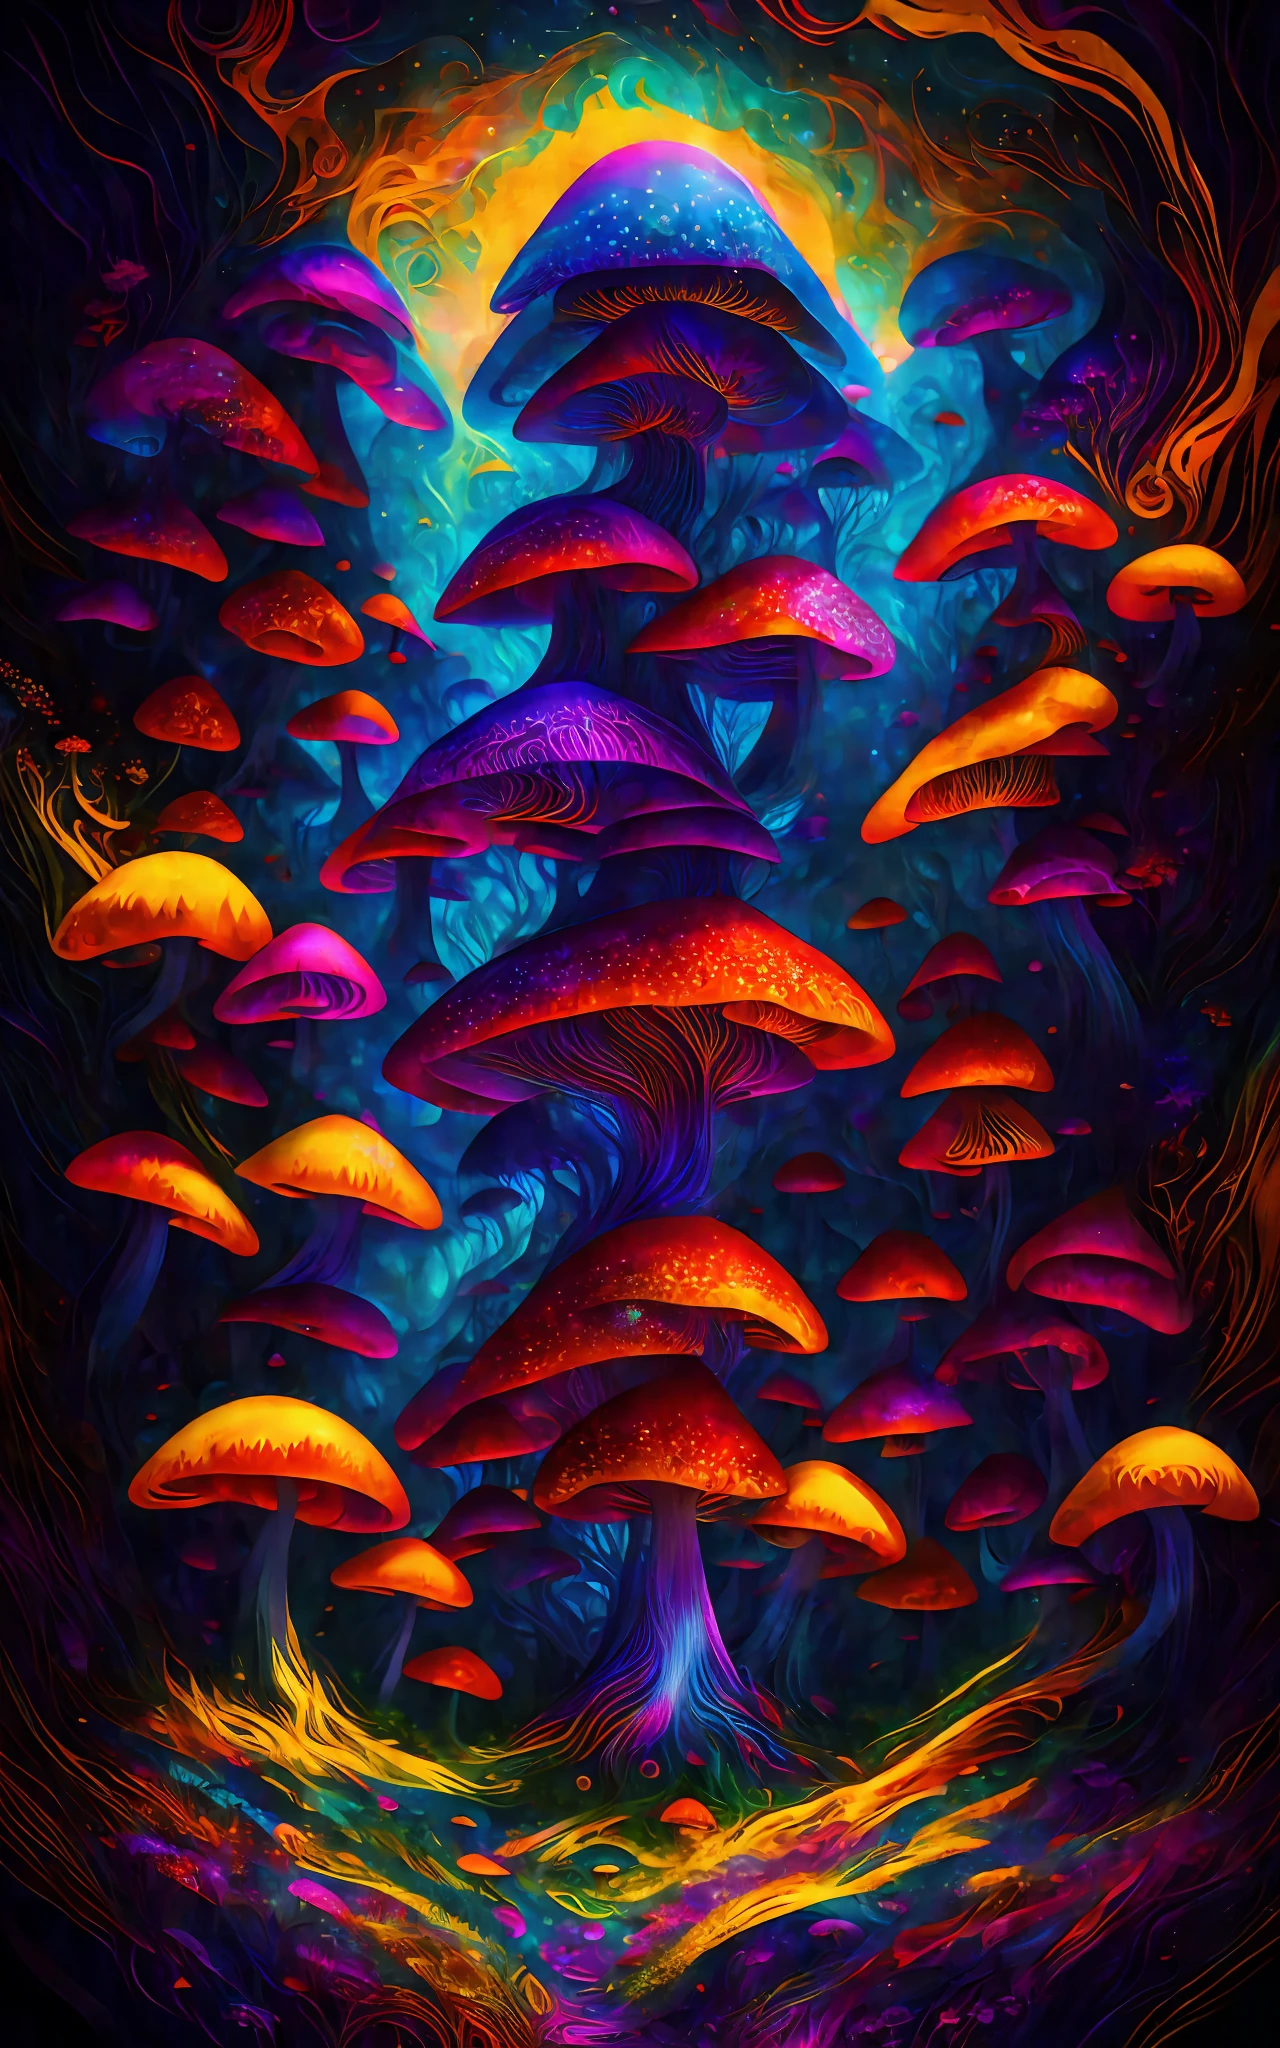 Vector Print in the Psychedelic Style: A mesmerizing combination of vibrant colors and abstract shapes in a mind-blowing setting. [A mushroom:1.9] psychedelic emerges at the center of the composition, emanating energy and mystery. Intricate details and psychedelic patterns wrap around the main element, creating a sense of movement and depth. Tags: [masterpiece], vector print, psychedelic style, mushroom, vibrant colors, abstract shapes, mind-blowing scenery, energy, mystery, intricate details, psychedelic patterns, movement, depth, [White background].